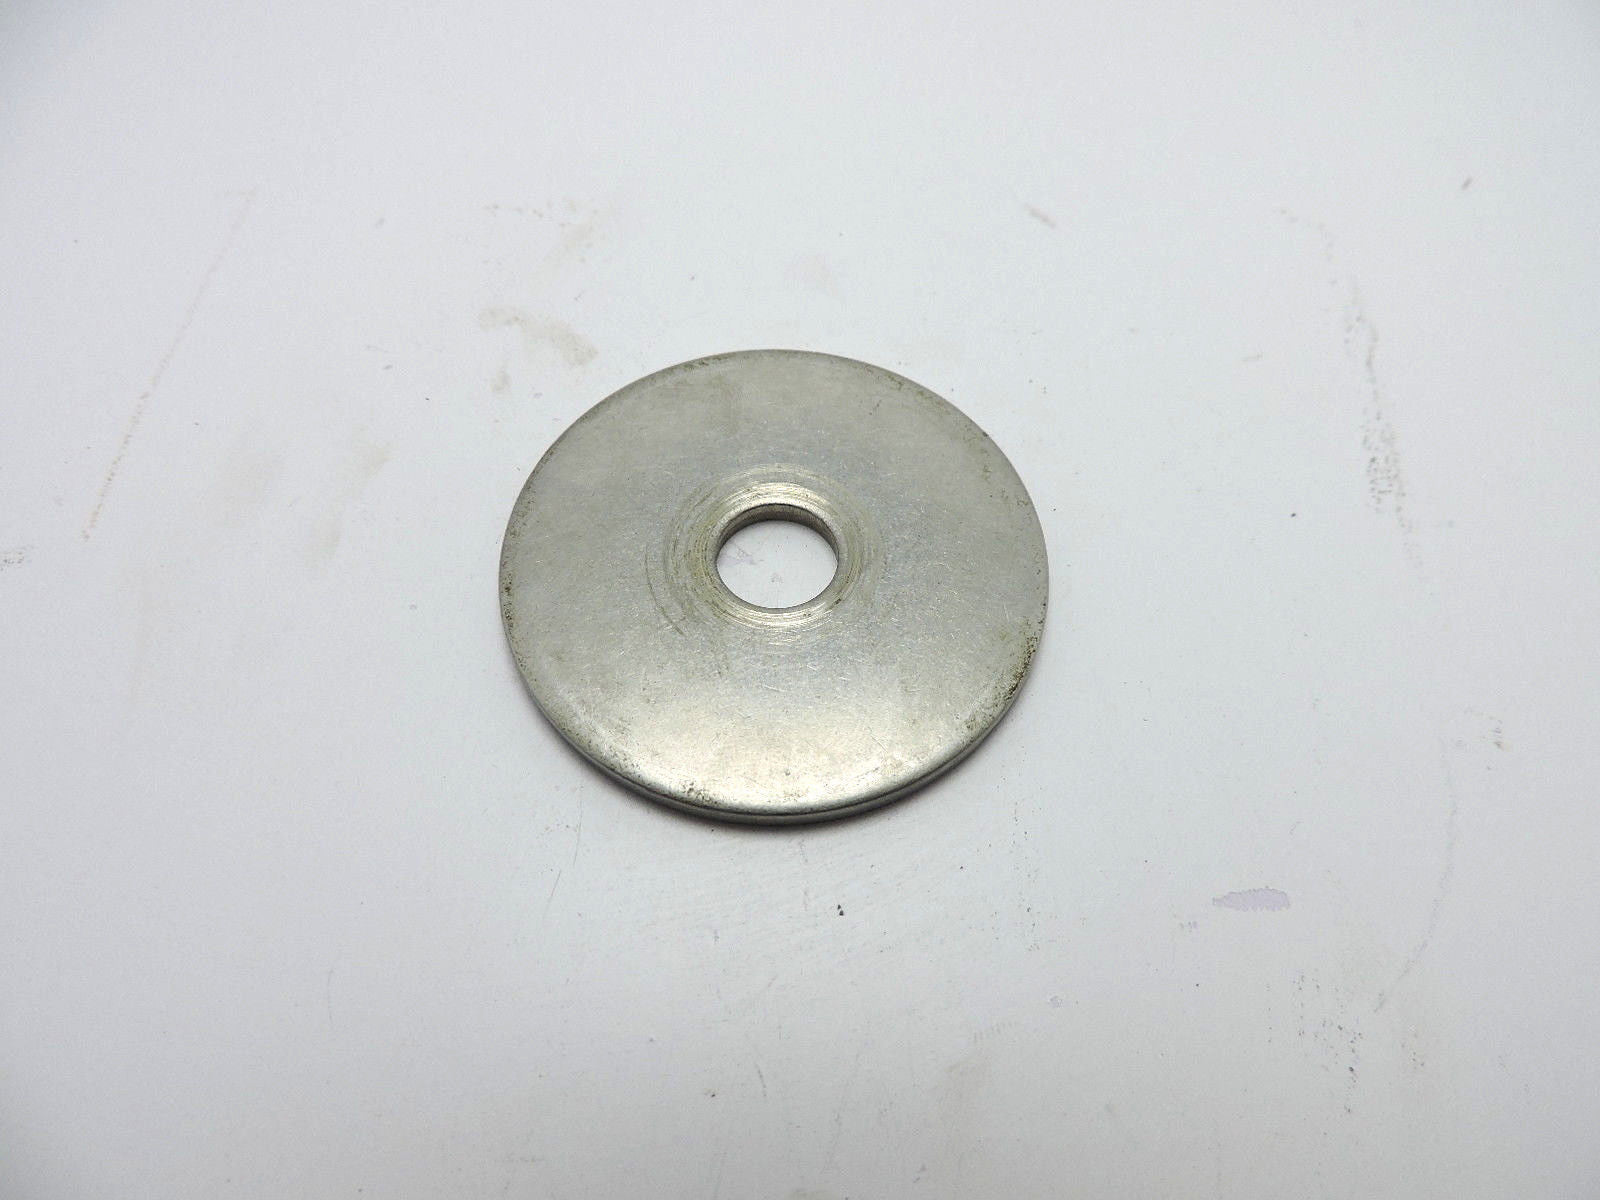 Washer - Berkel OEM Part # 3475-00781 - Available from City Food Equipment